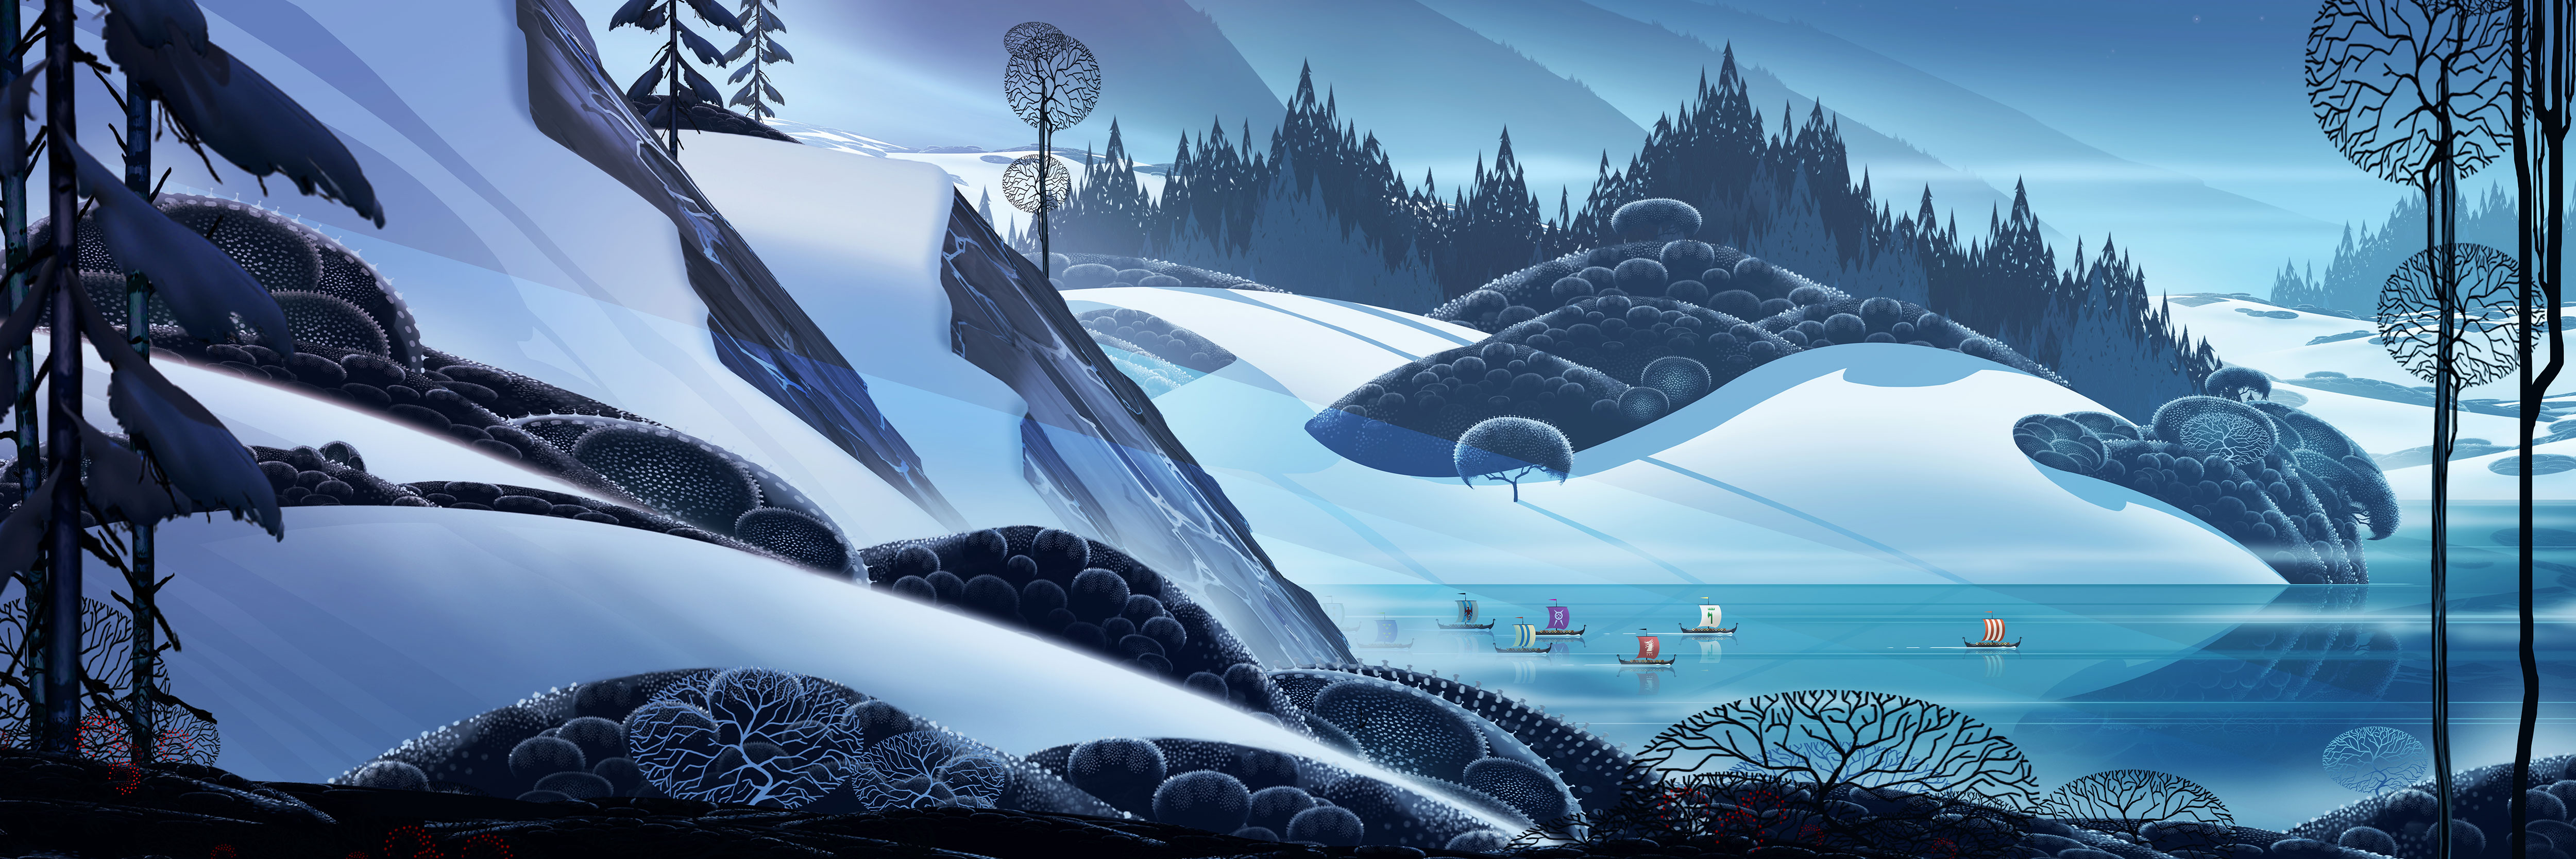 Fine Art Banner Saga Is One Of The Most Beautiful Video Games Ive 5000x1667